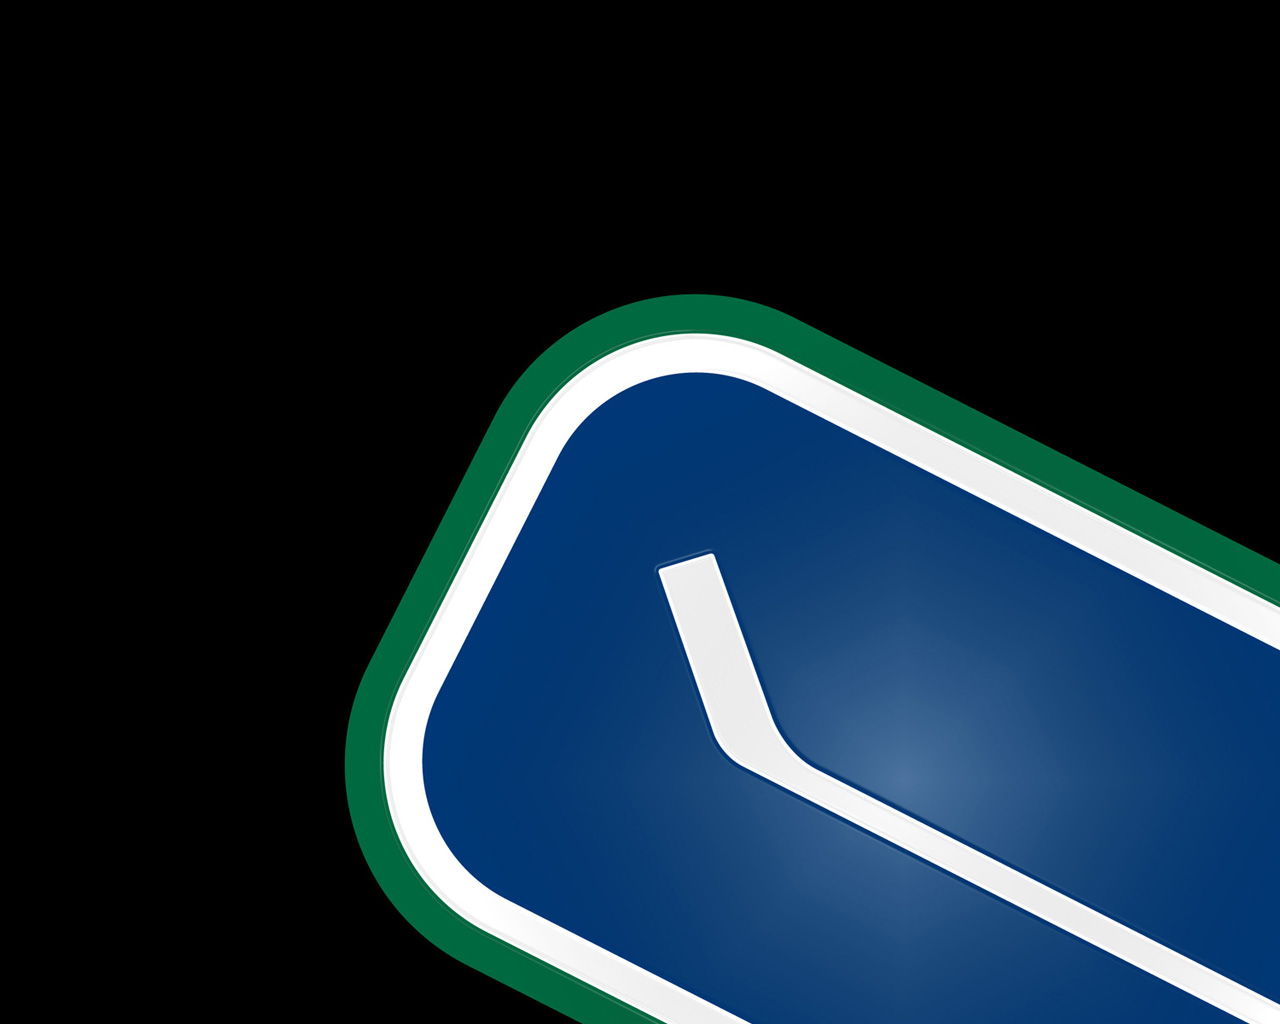 Skate Logo Vancouver Canucks Team All Monitor Sizes. Background HD